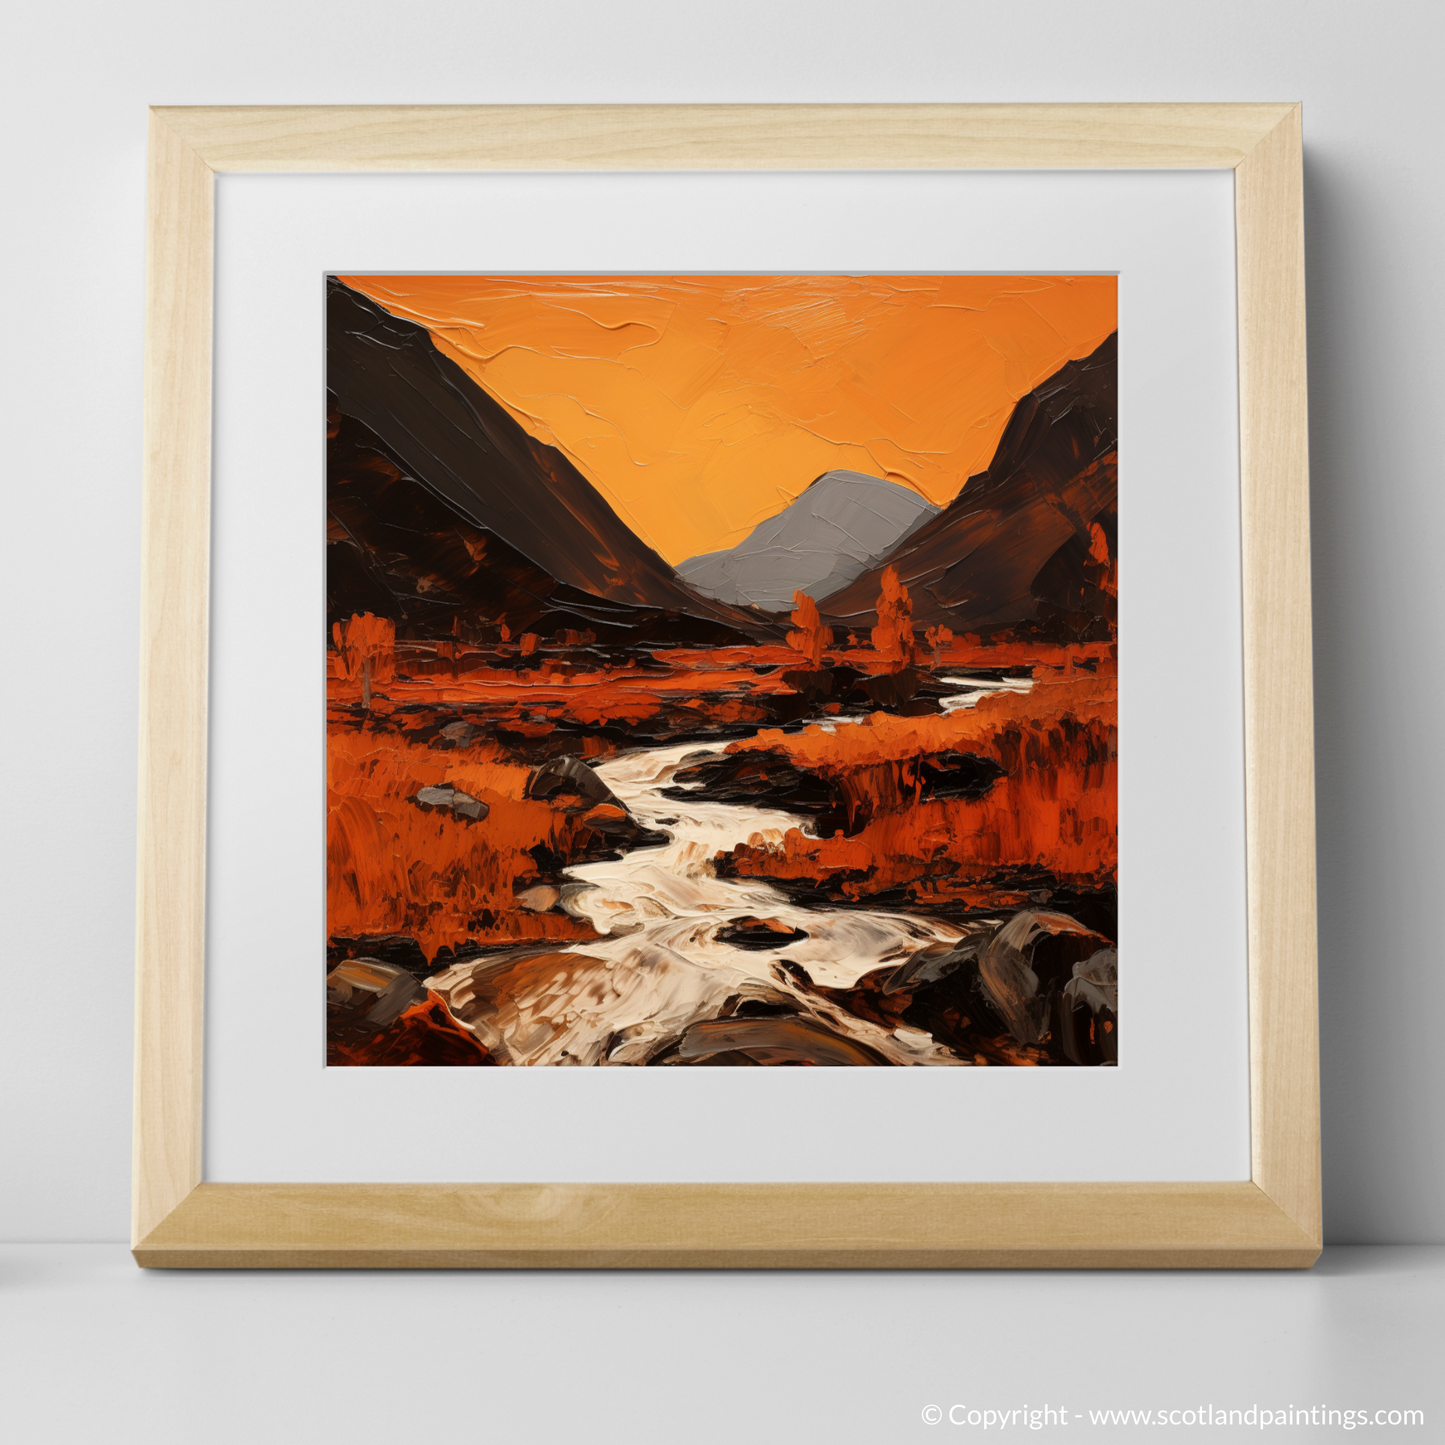 Art Print of Autumn hues in Glencoe with a natural frame